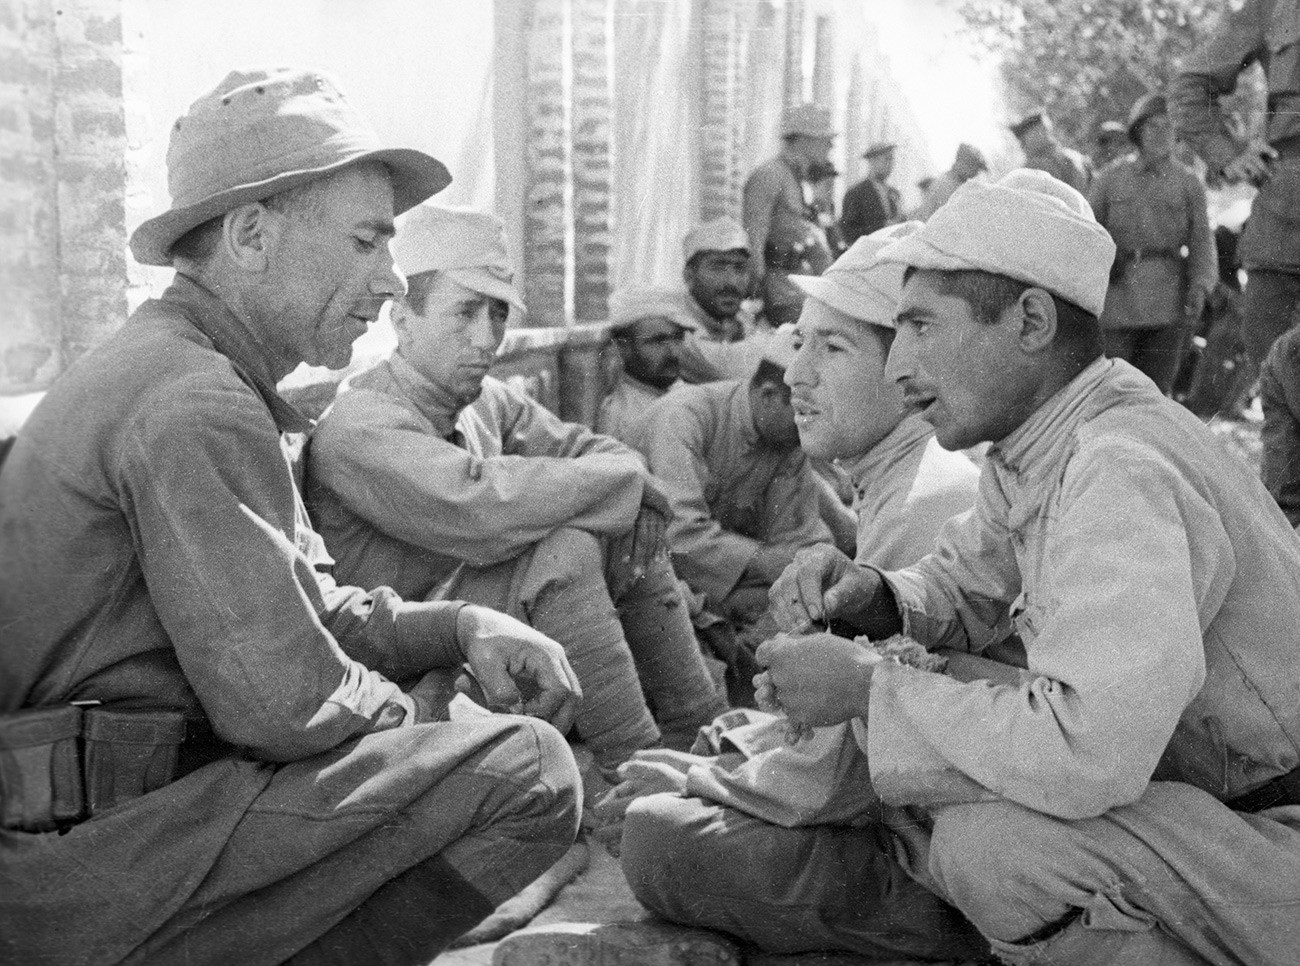 The Red Army man talks to a soldier of the Iranian army, which laid down arms.